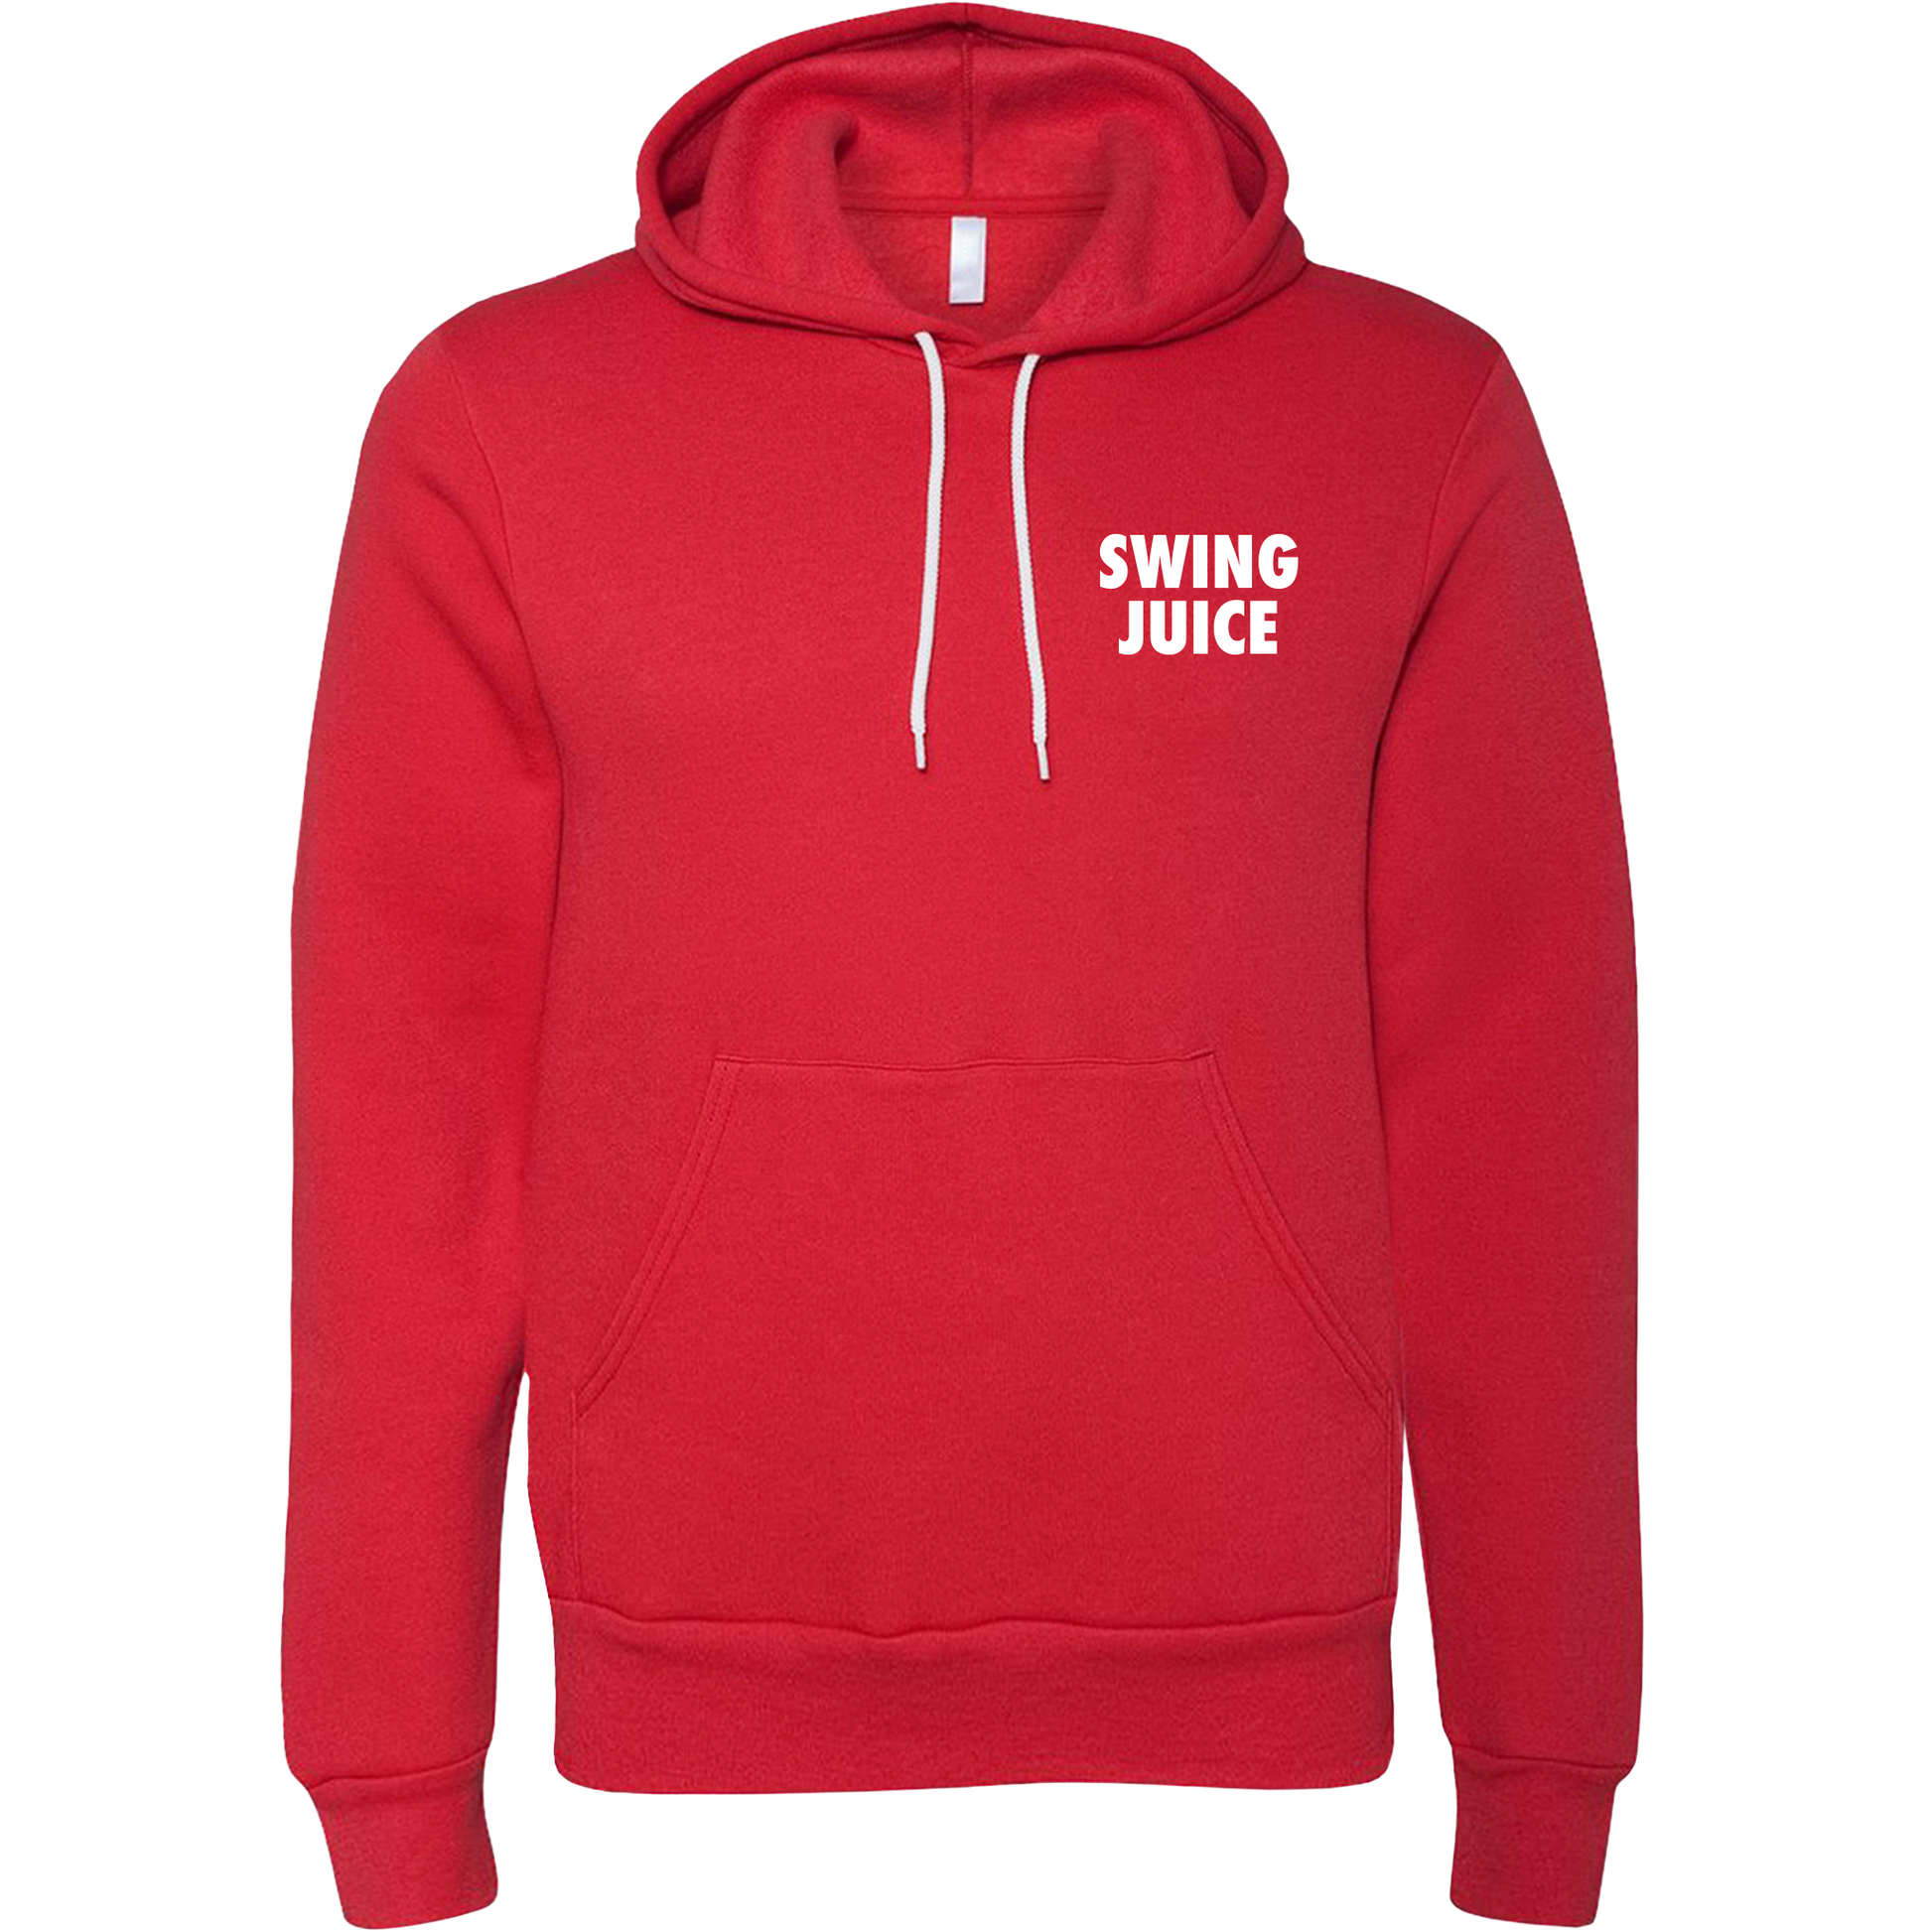 Golf & Pizza Graphic Unisex Hoodie-Red